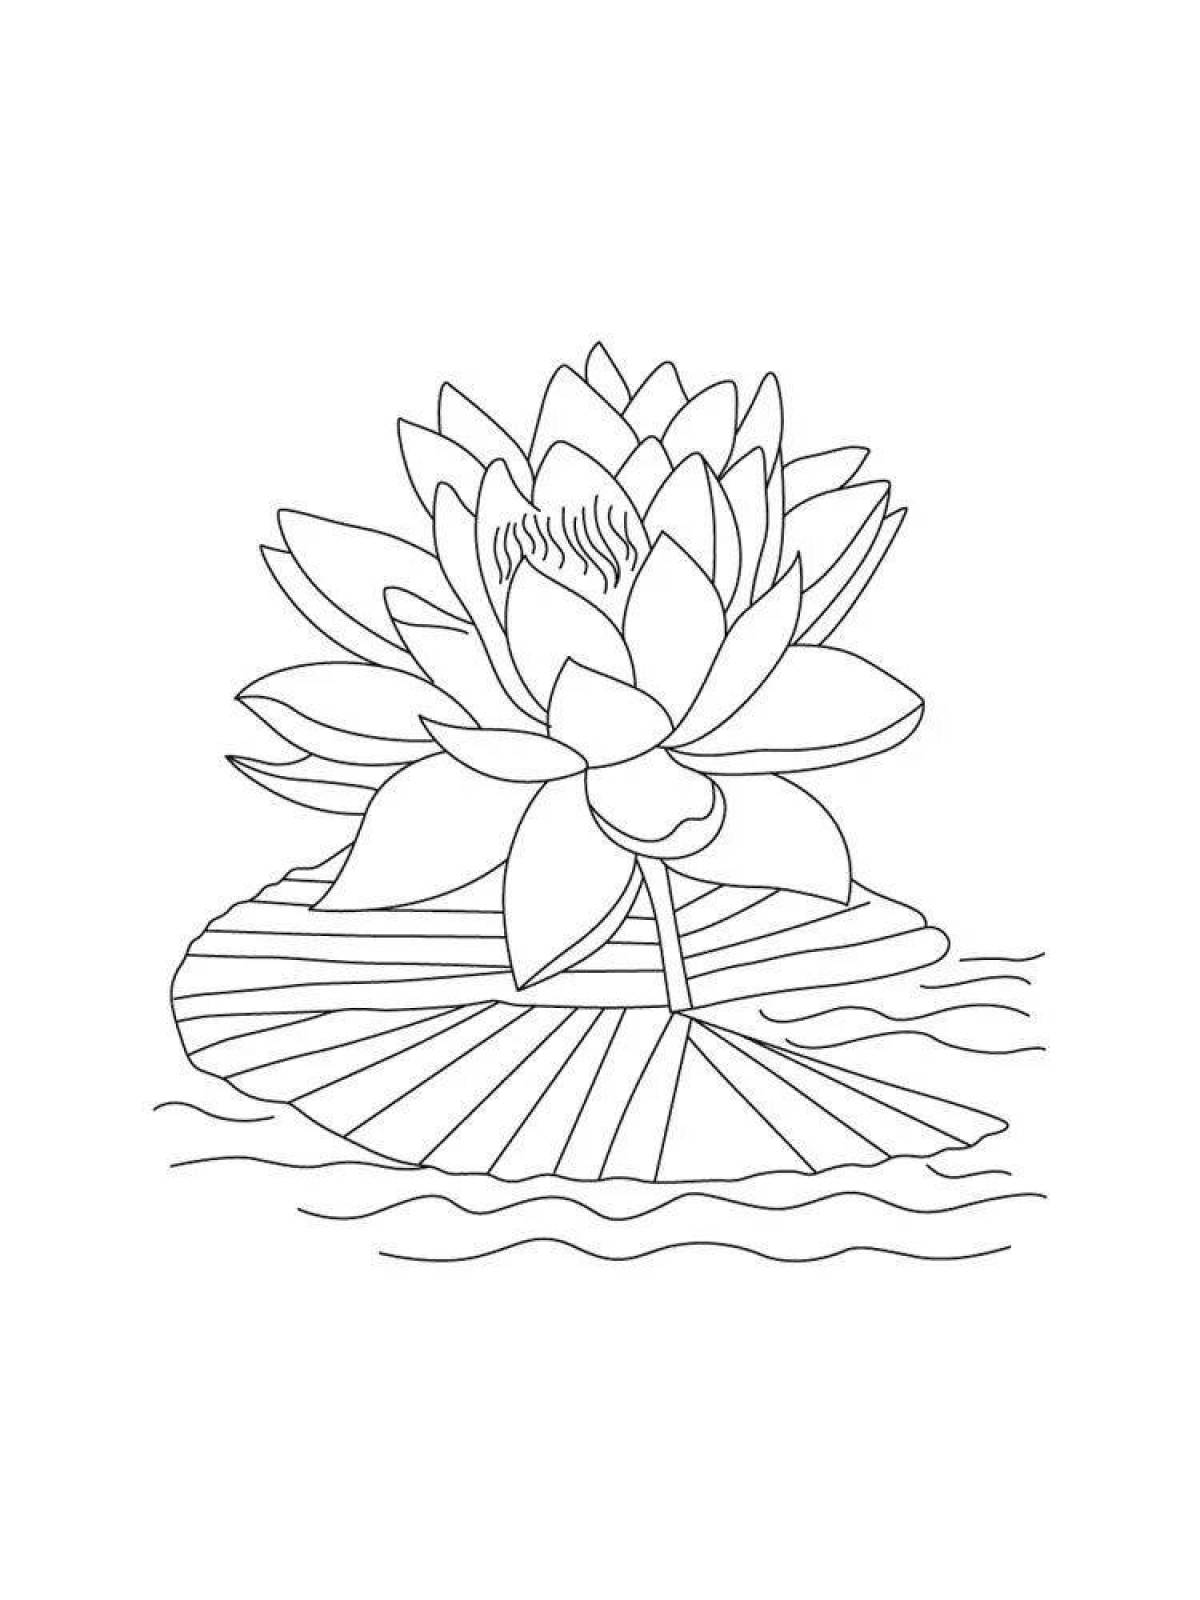 Glowing white water lily coloring page